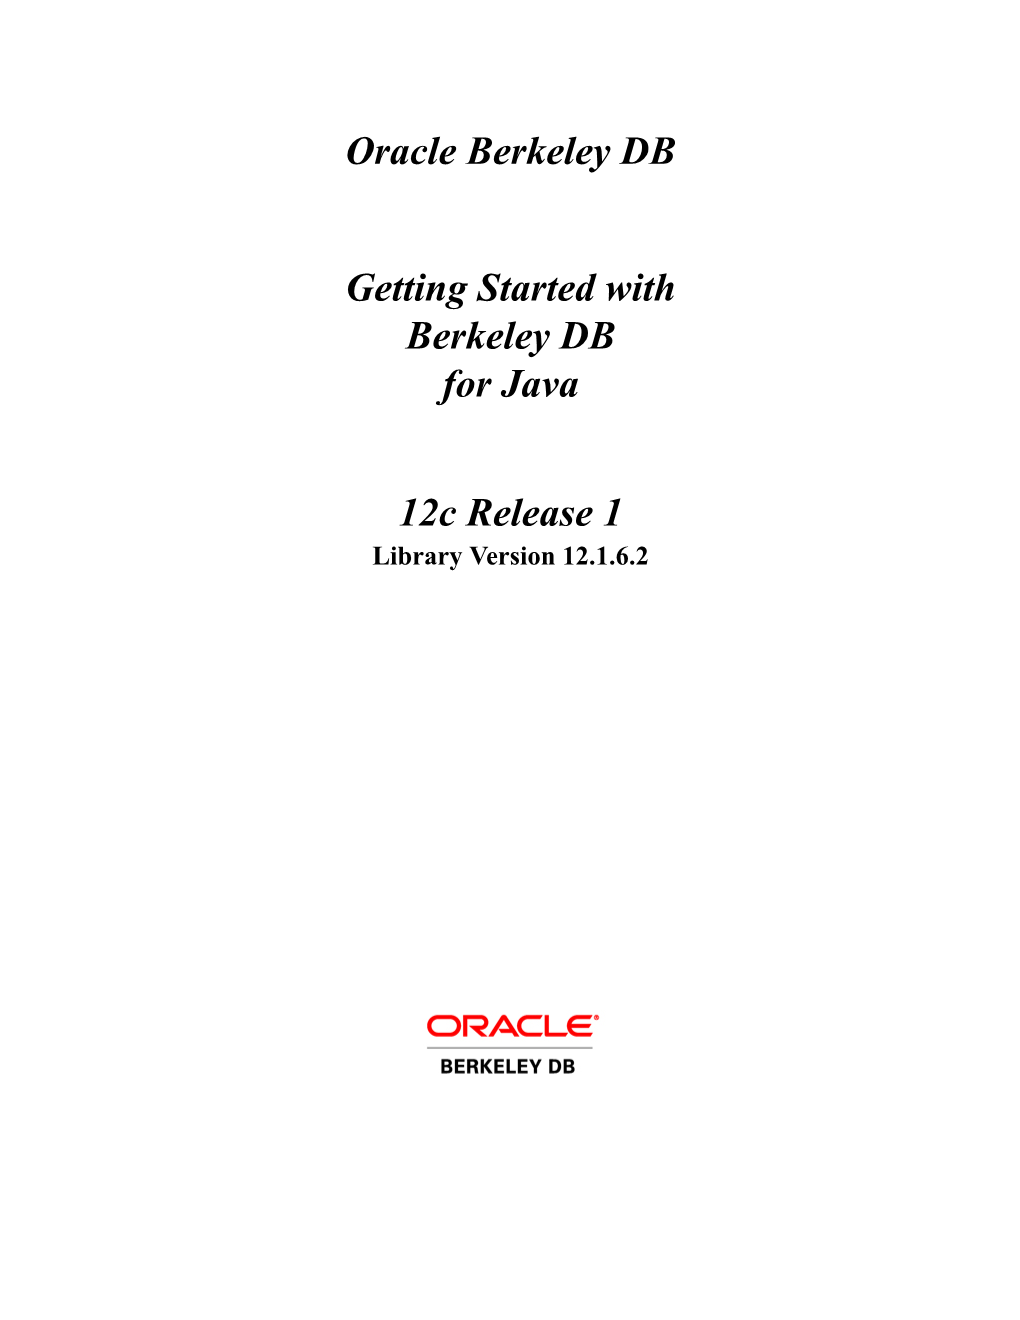 Getting Started with Berkeley DB for Java